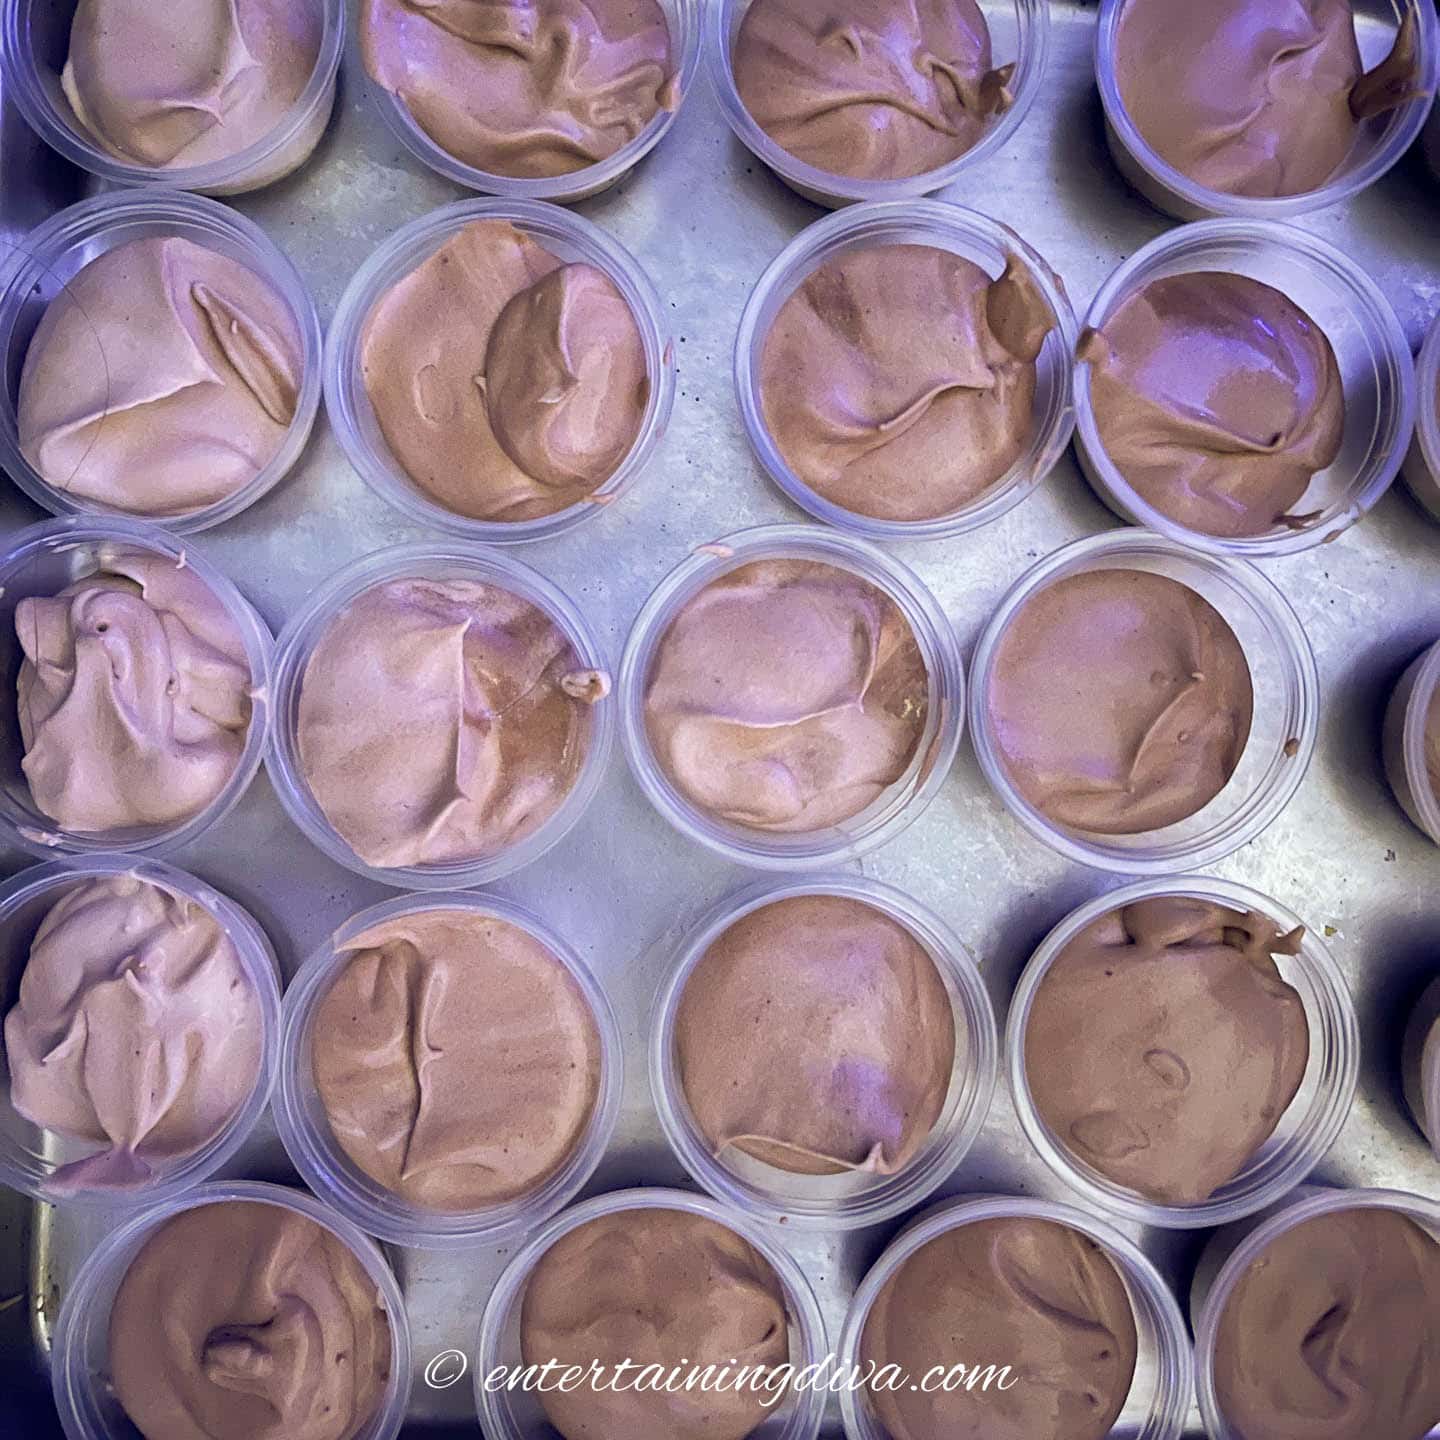 peanut butter chocolate pudding shots in shot cups on a baking tray